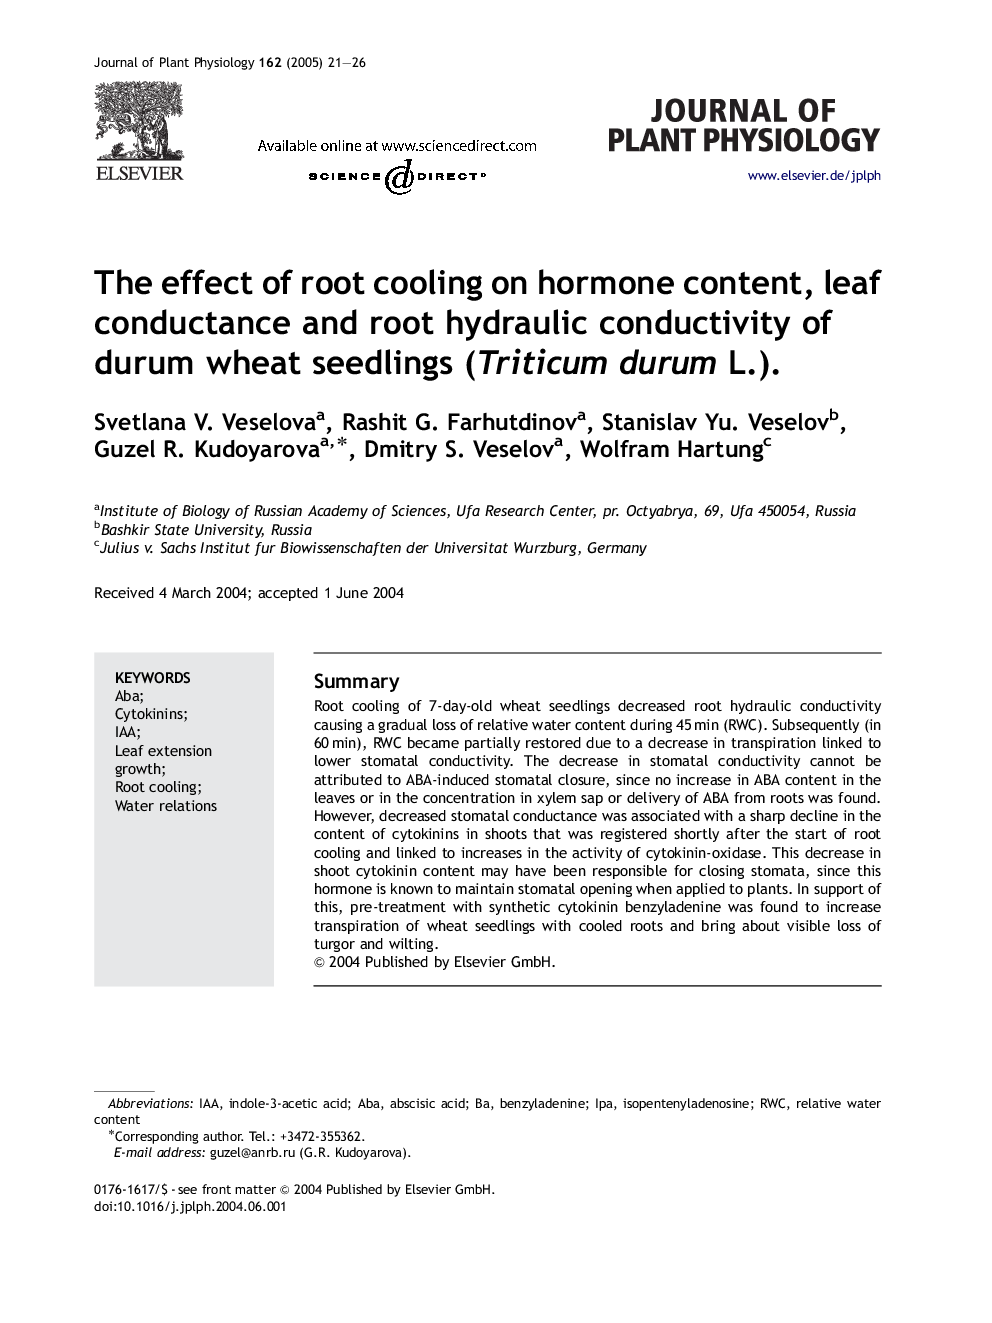 The effect of root cooling on hormone content, leaf conductance and root hydraulic conductivity of durum wheat seedlings (Triticum durum L.).